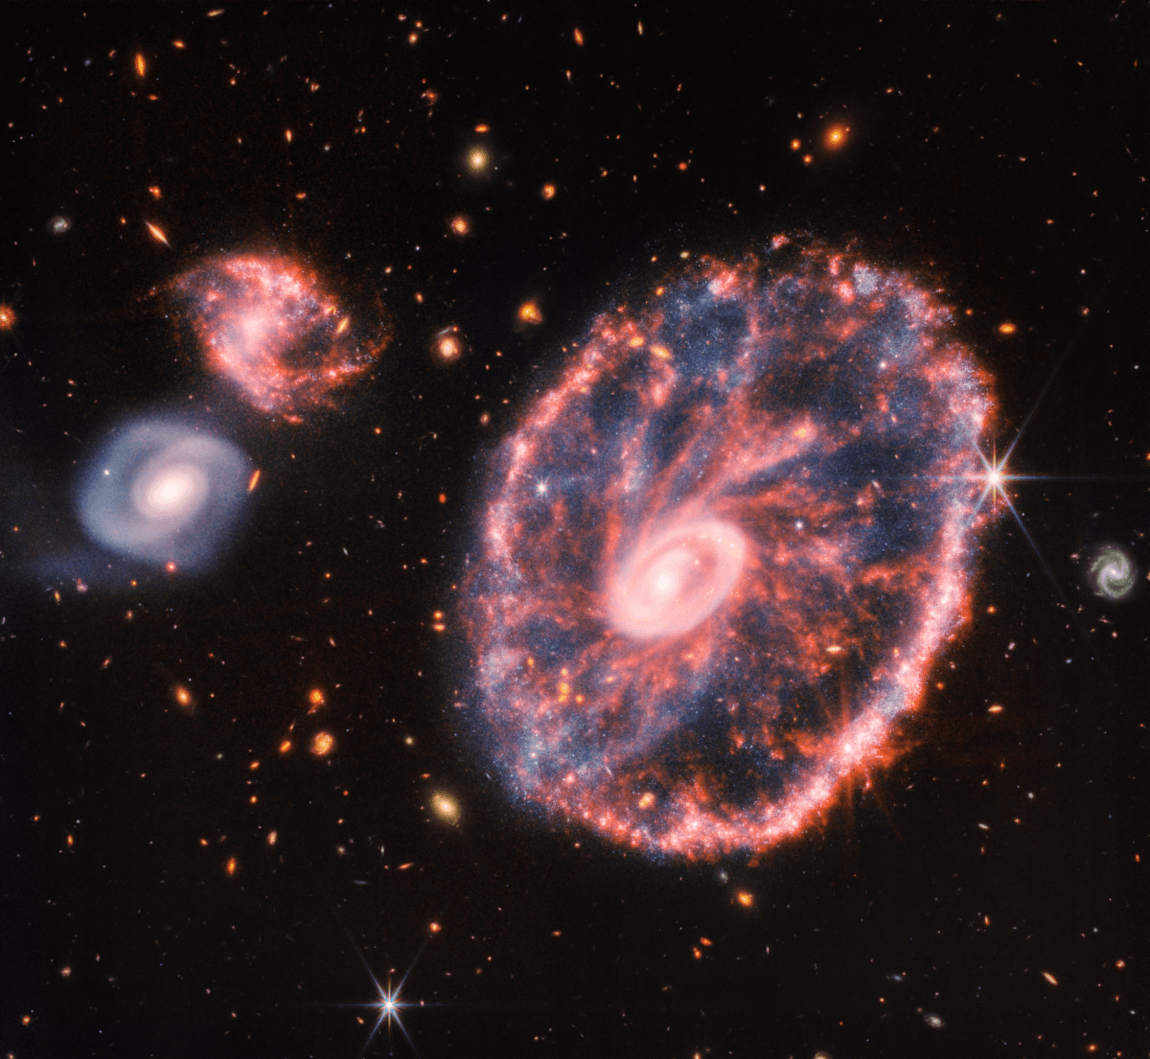 A large red galaxy with two smaller galaxies to the left and multiple small planets and galaxies visible in distant space.